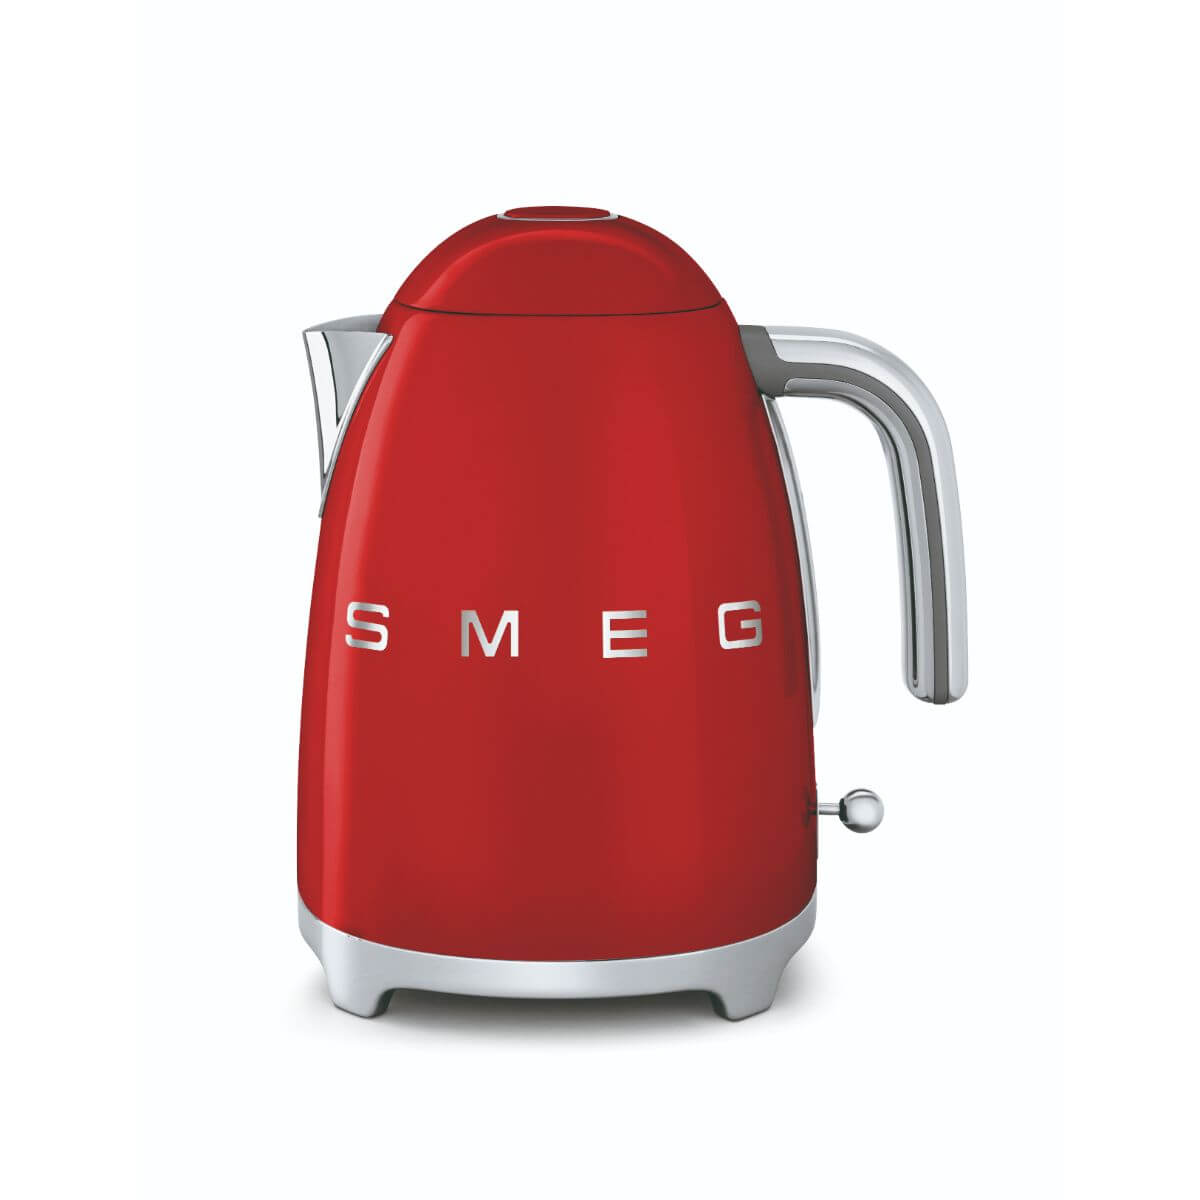 SMEG 50's Style Kettle - Red Color